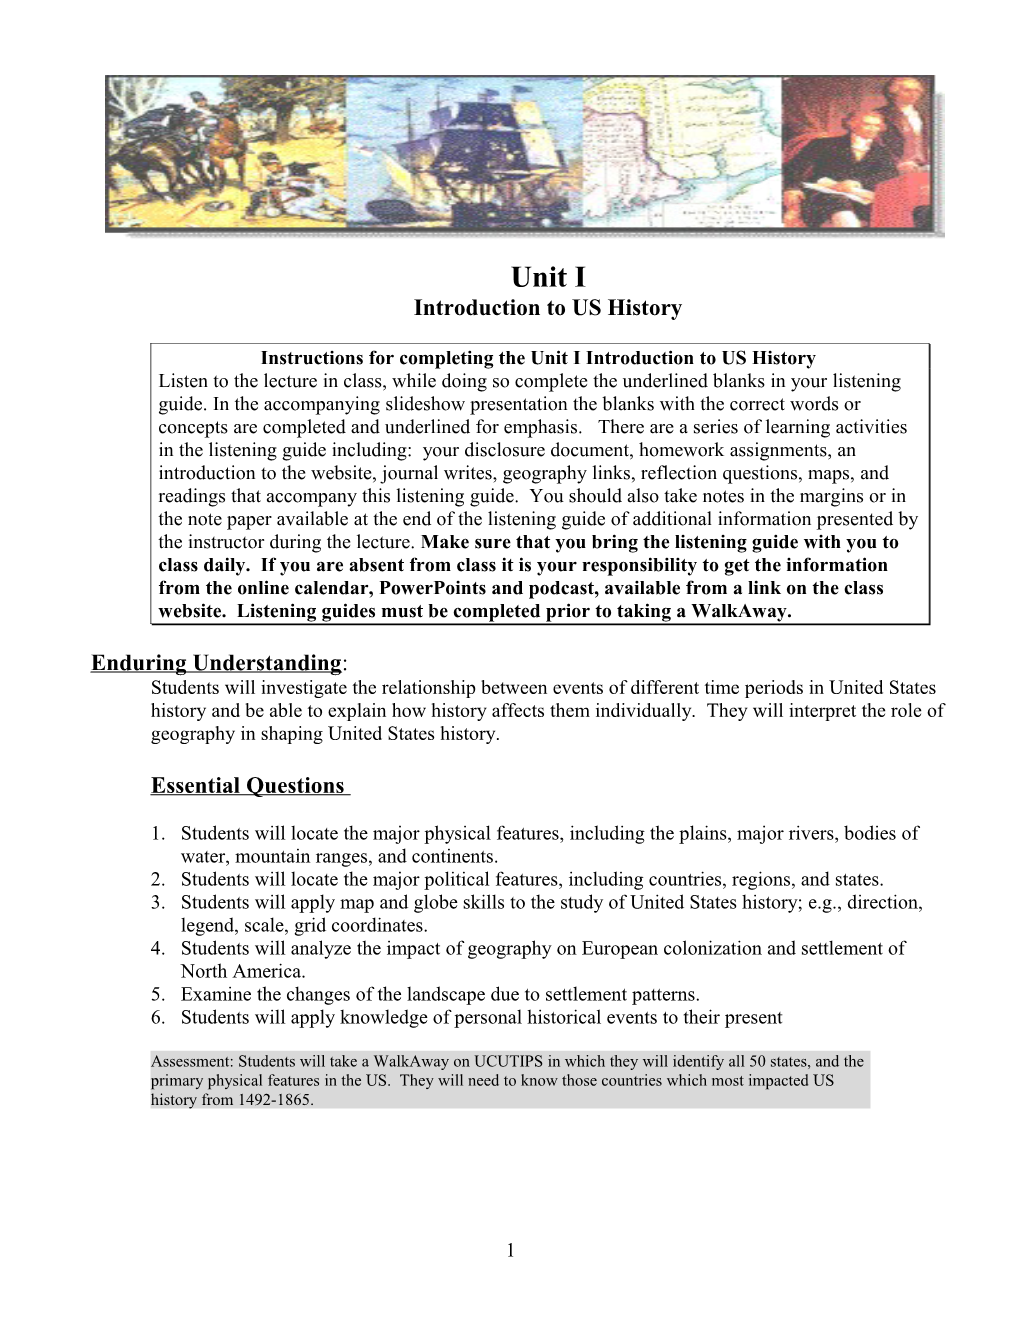 Instructions for Completing the Unit I Introduction to US History